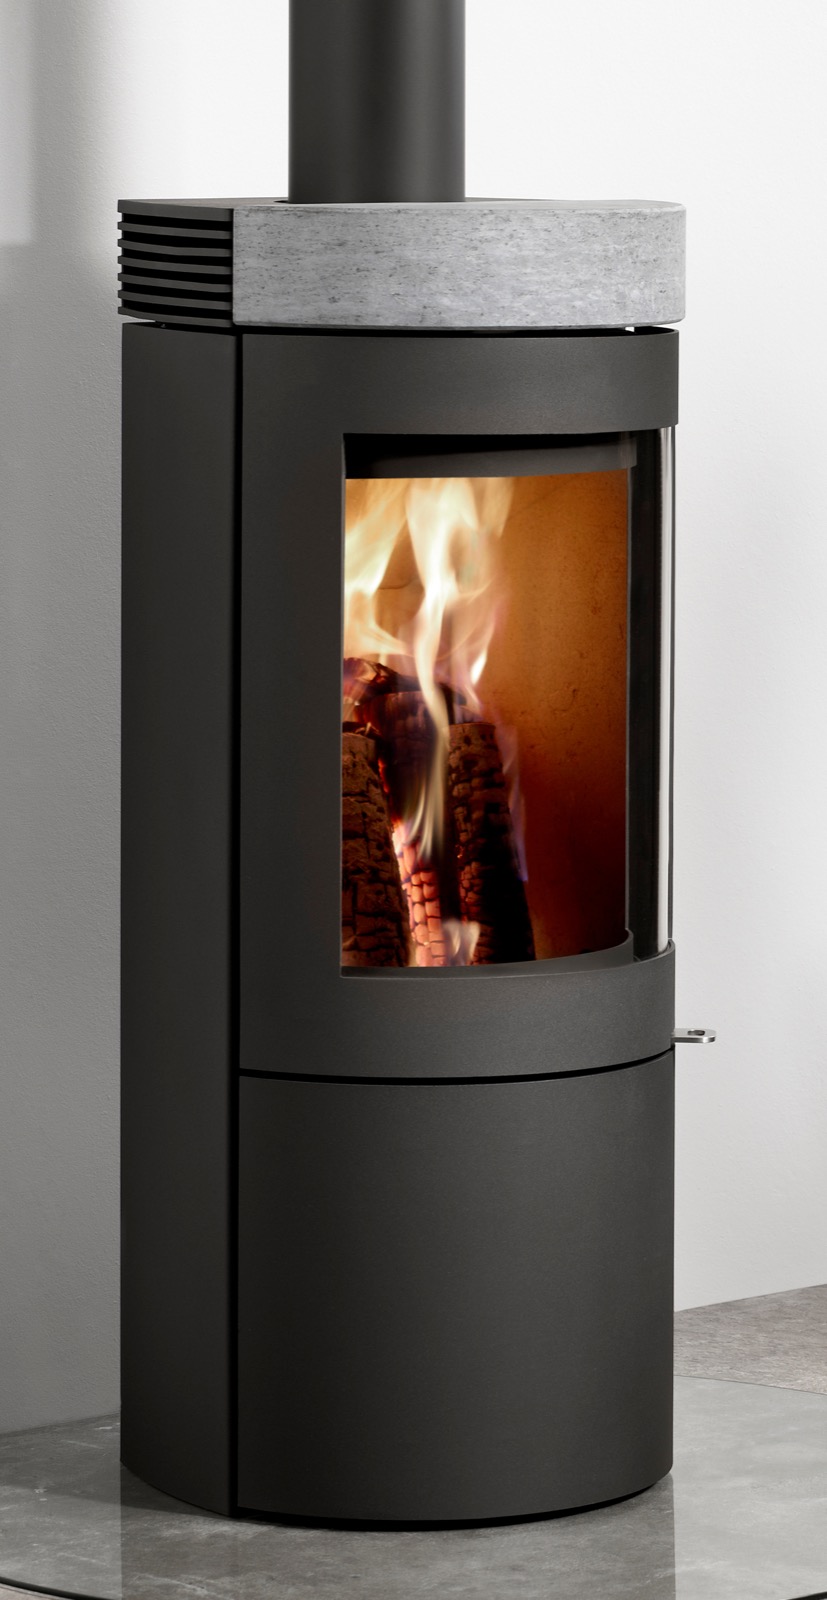 Westfire Uniq 26 SE Convection Wood Burning Stove in Black with Soapstone Top